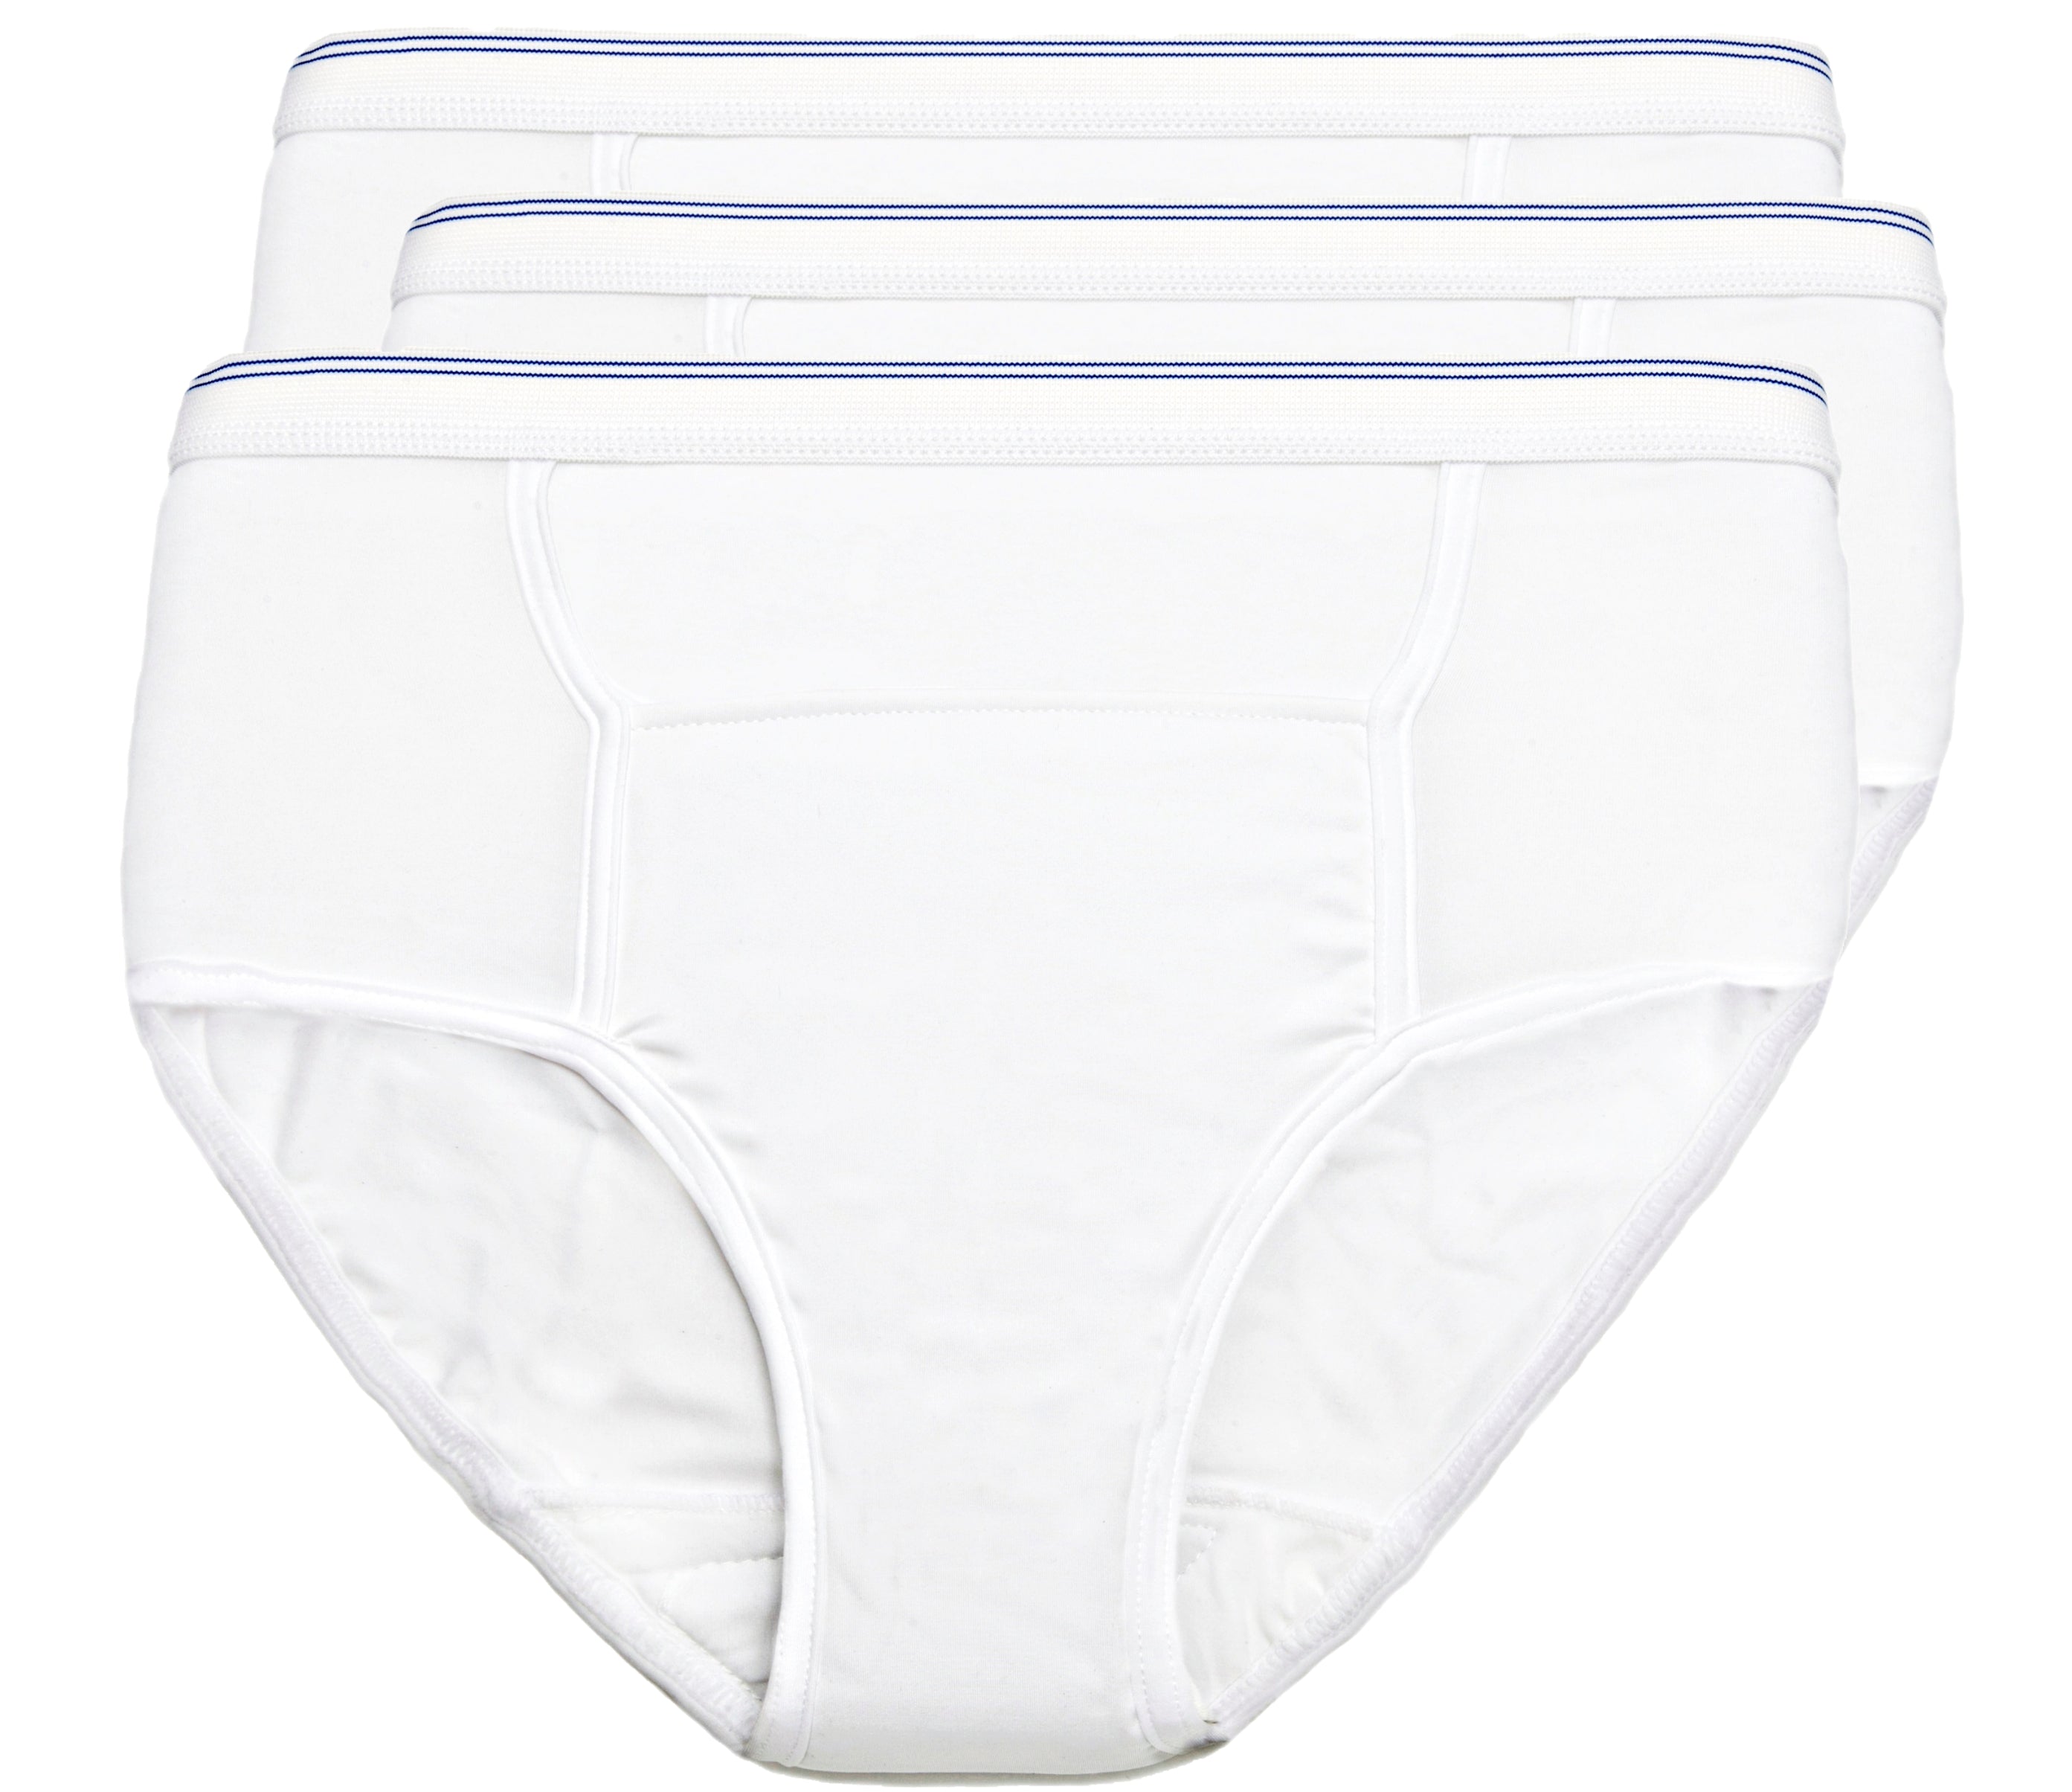 Men's Reusable Incontinence Brief 3-Pack